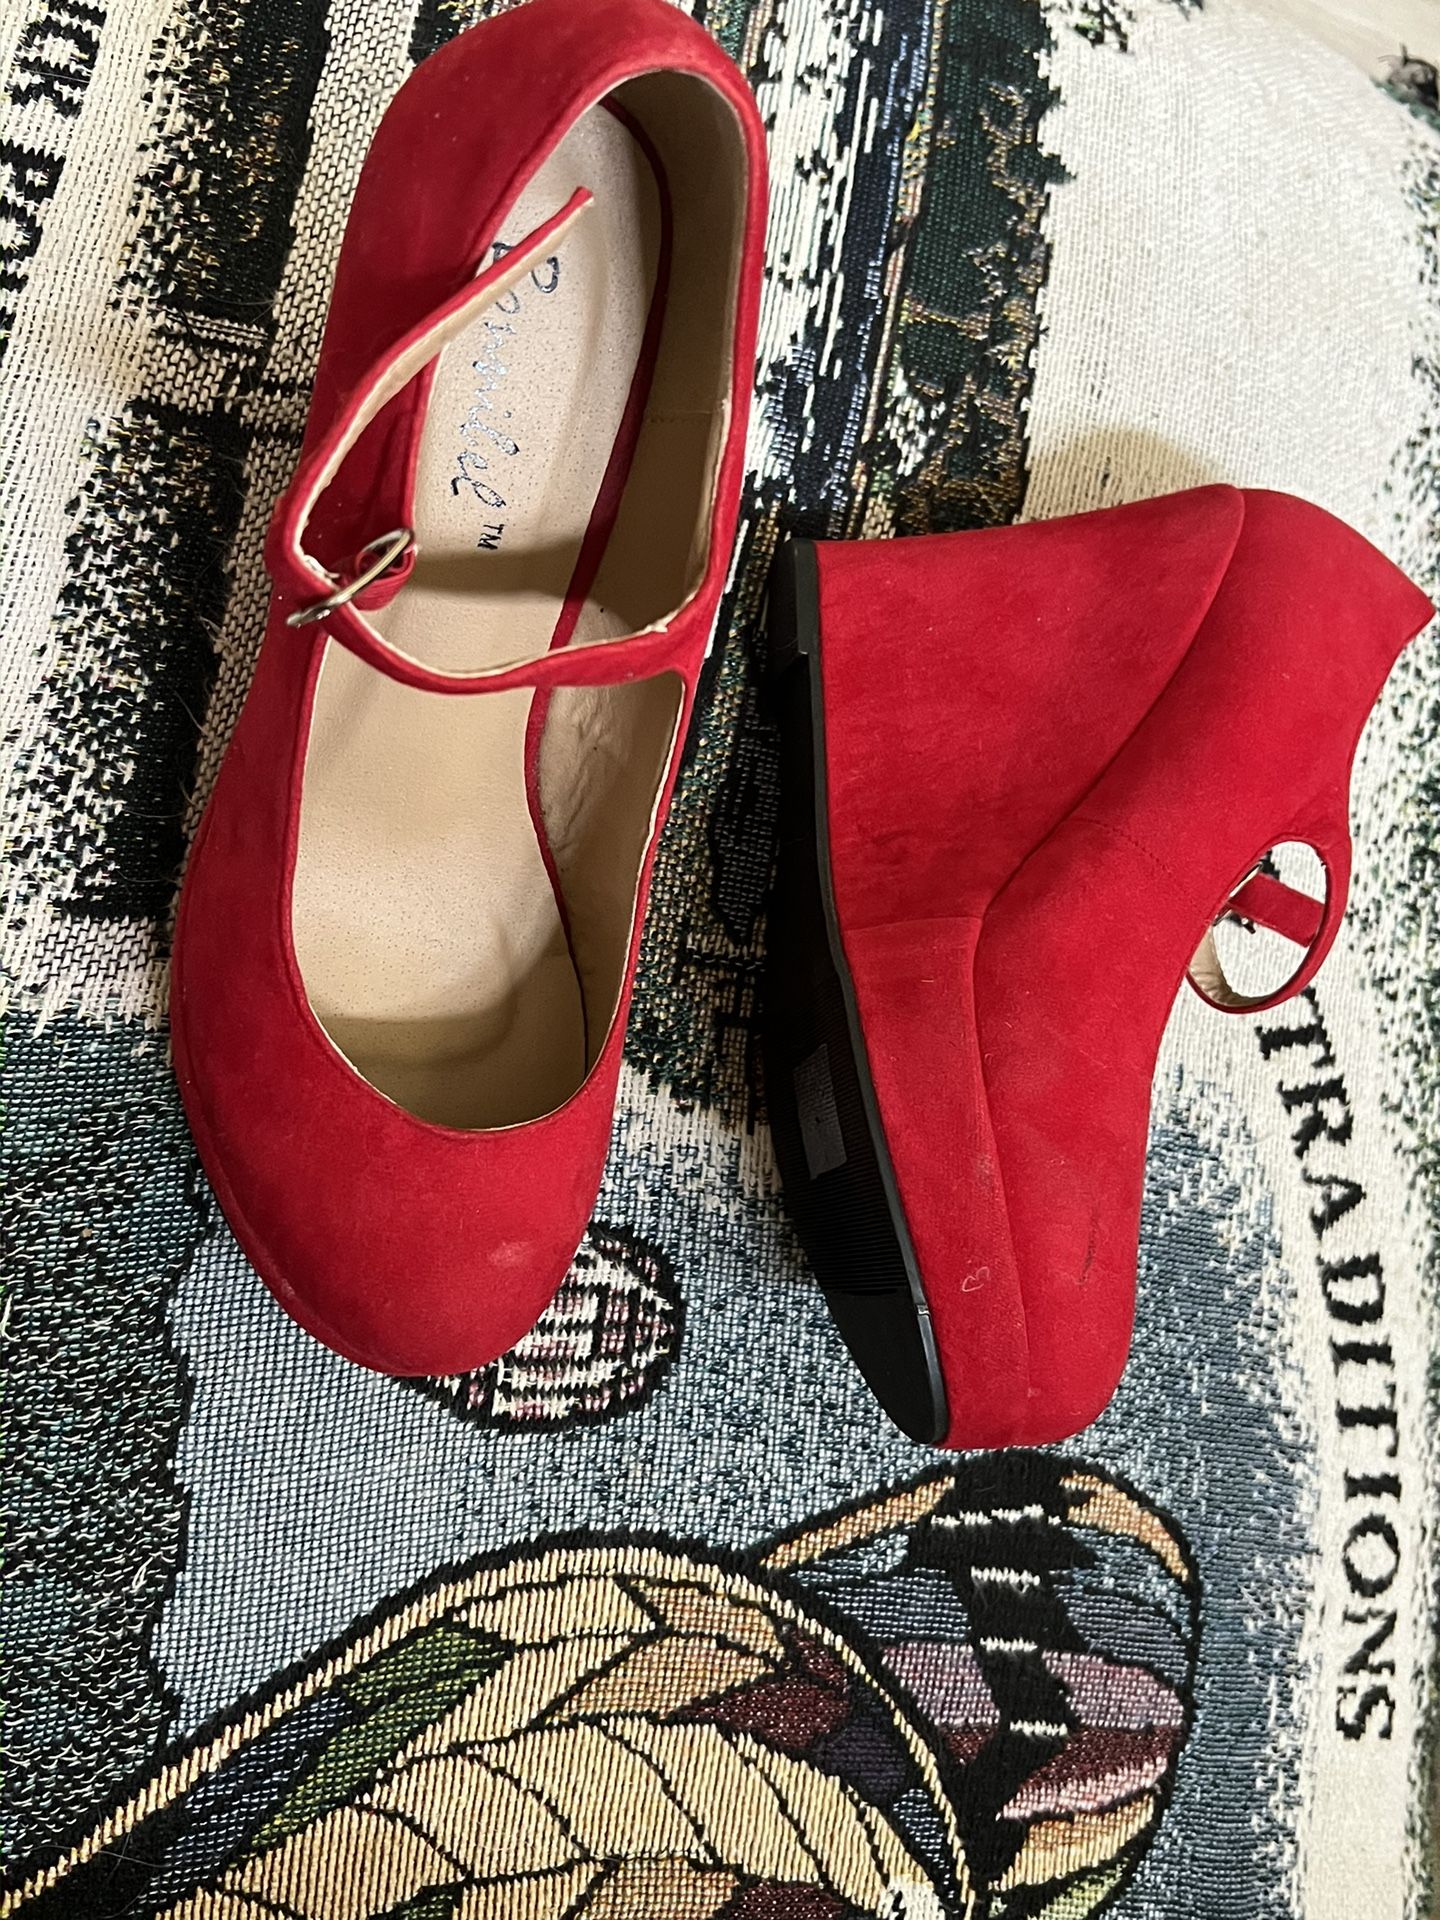 Red Wedge Heels Size 8 1/2